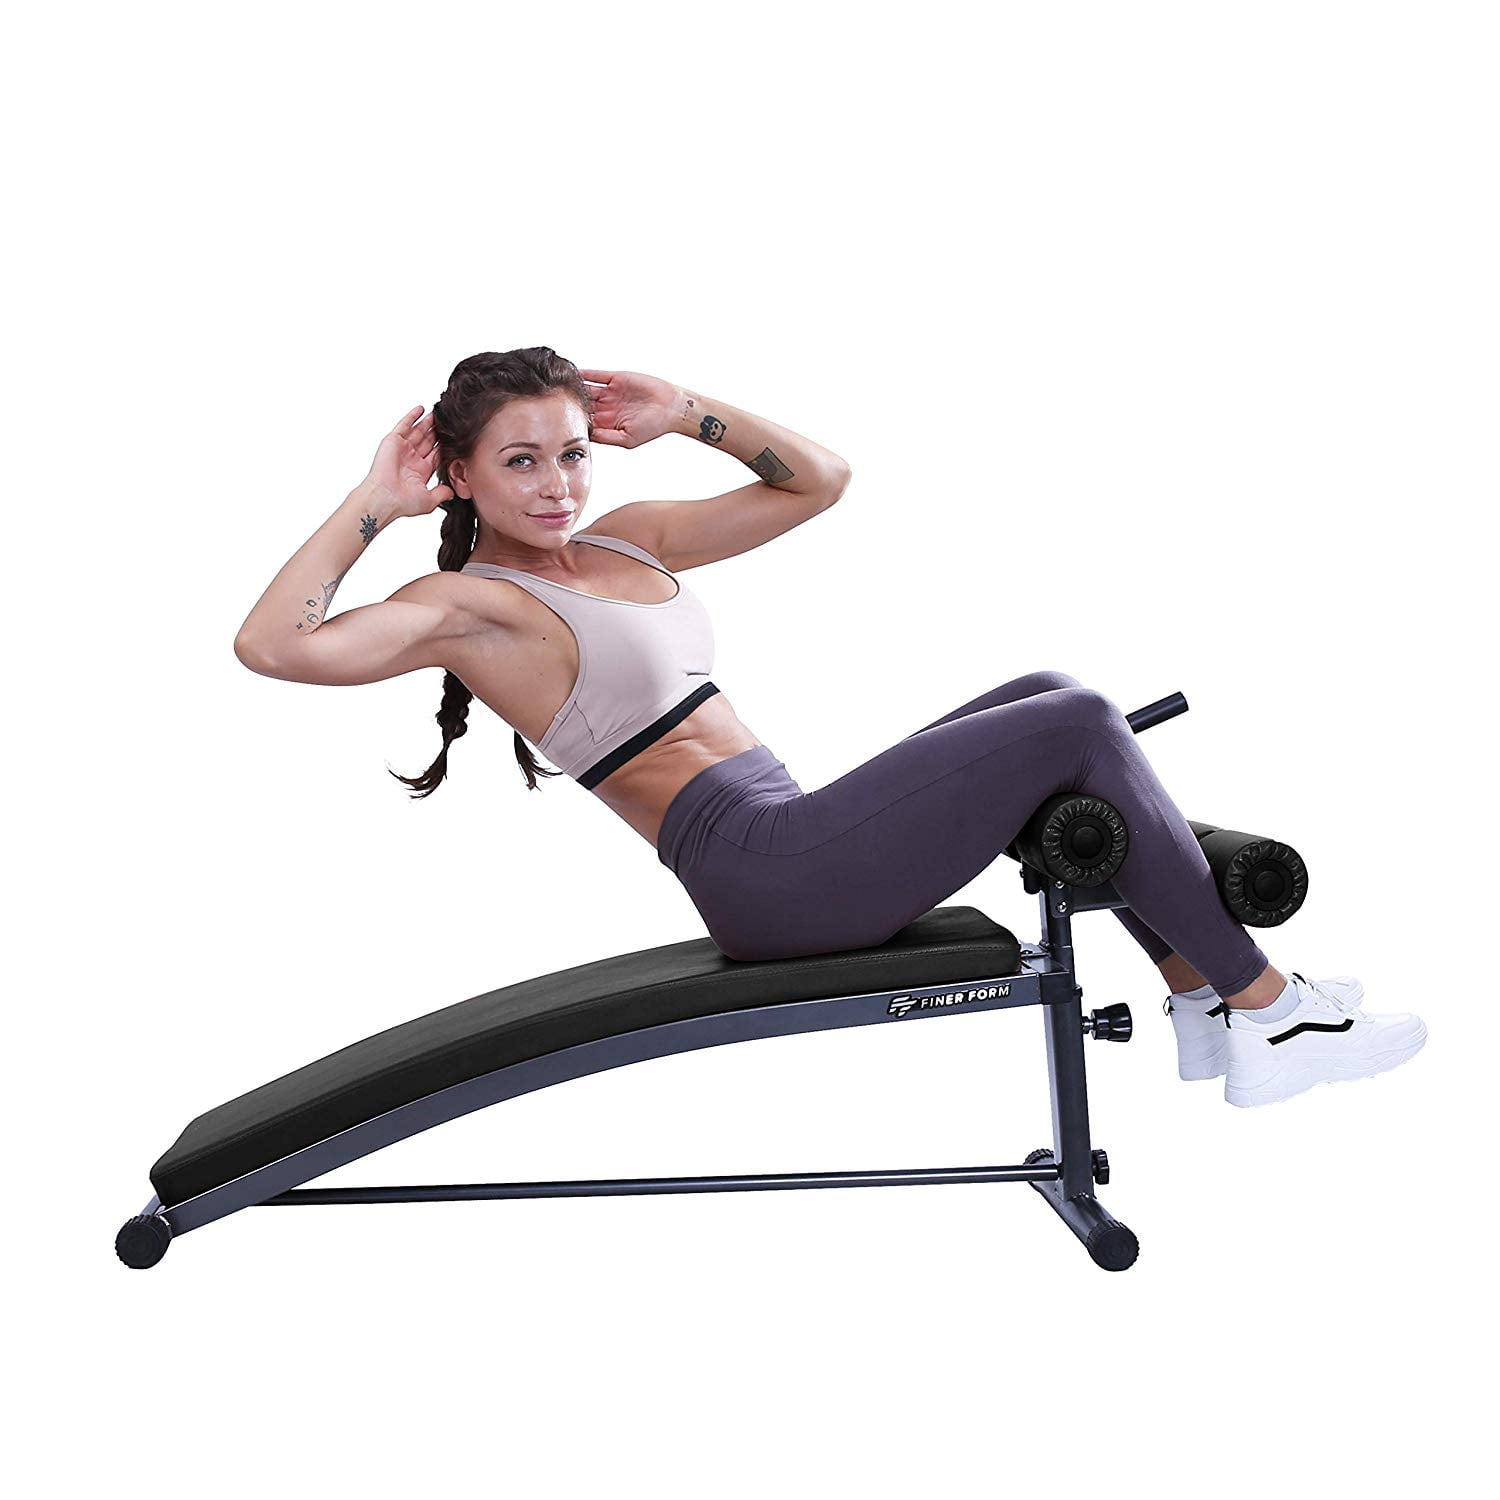 Details about   Sit Up Bench Decline Abdominal Fitness Home Gym Exercise Workout Equipment AU 